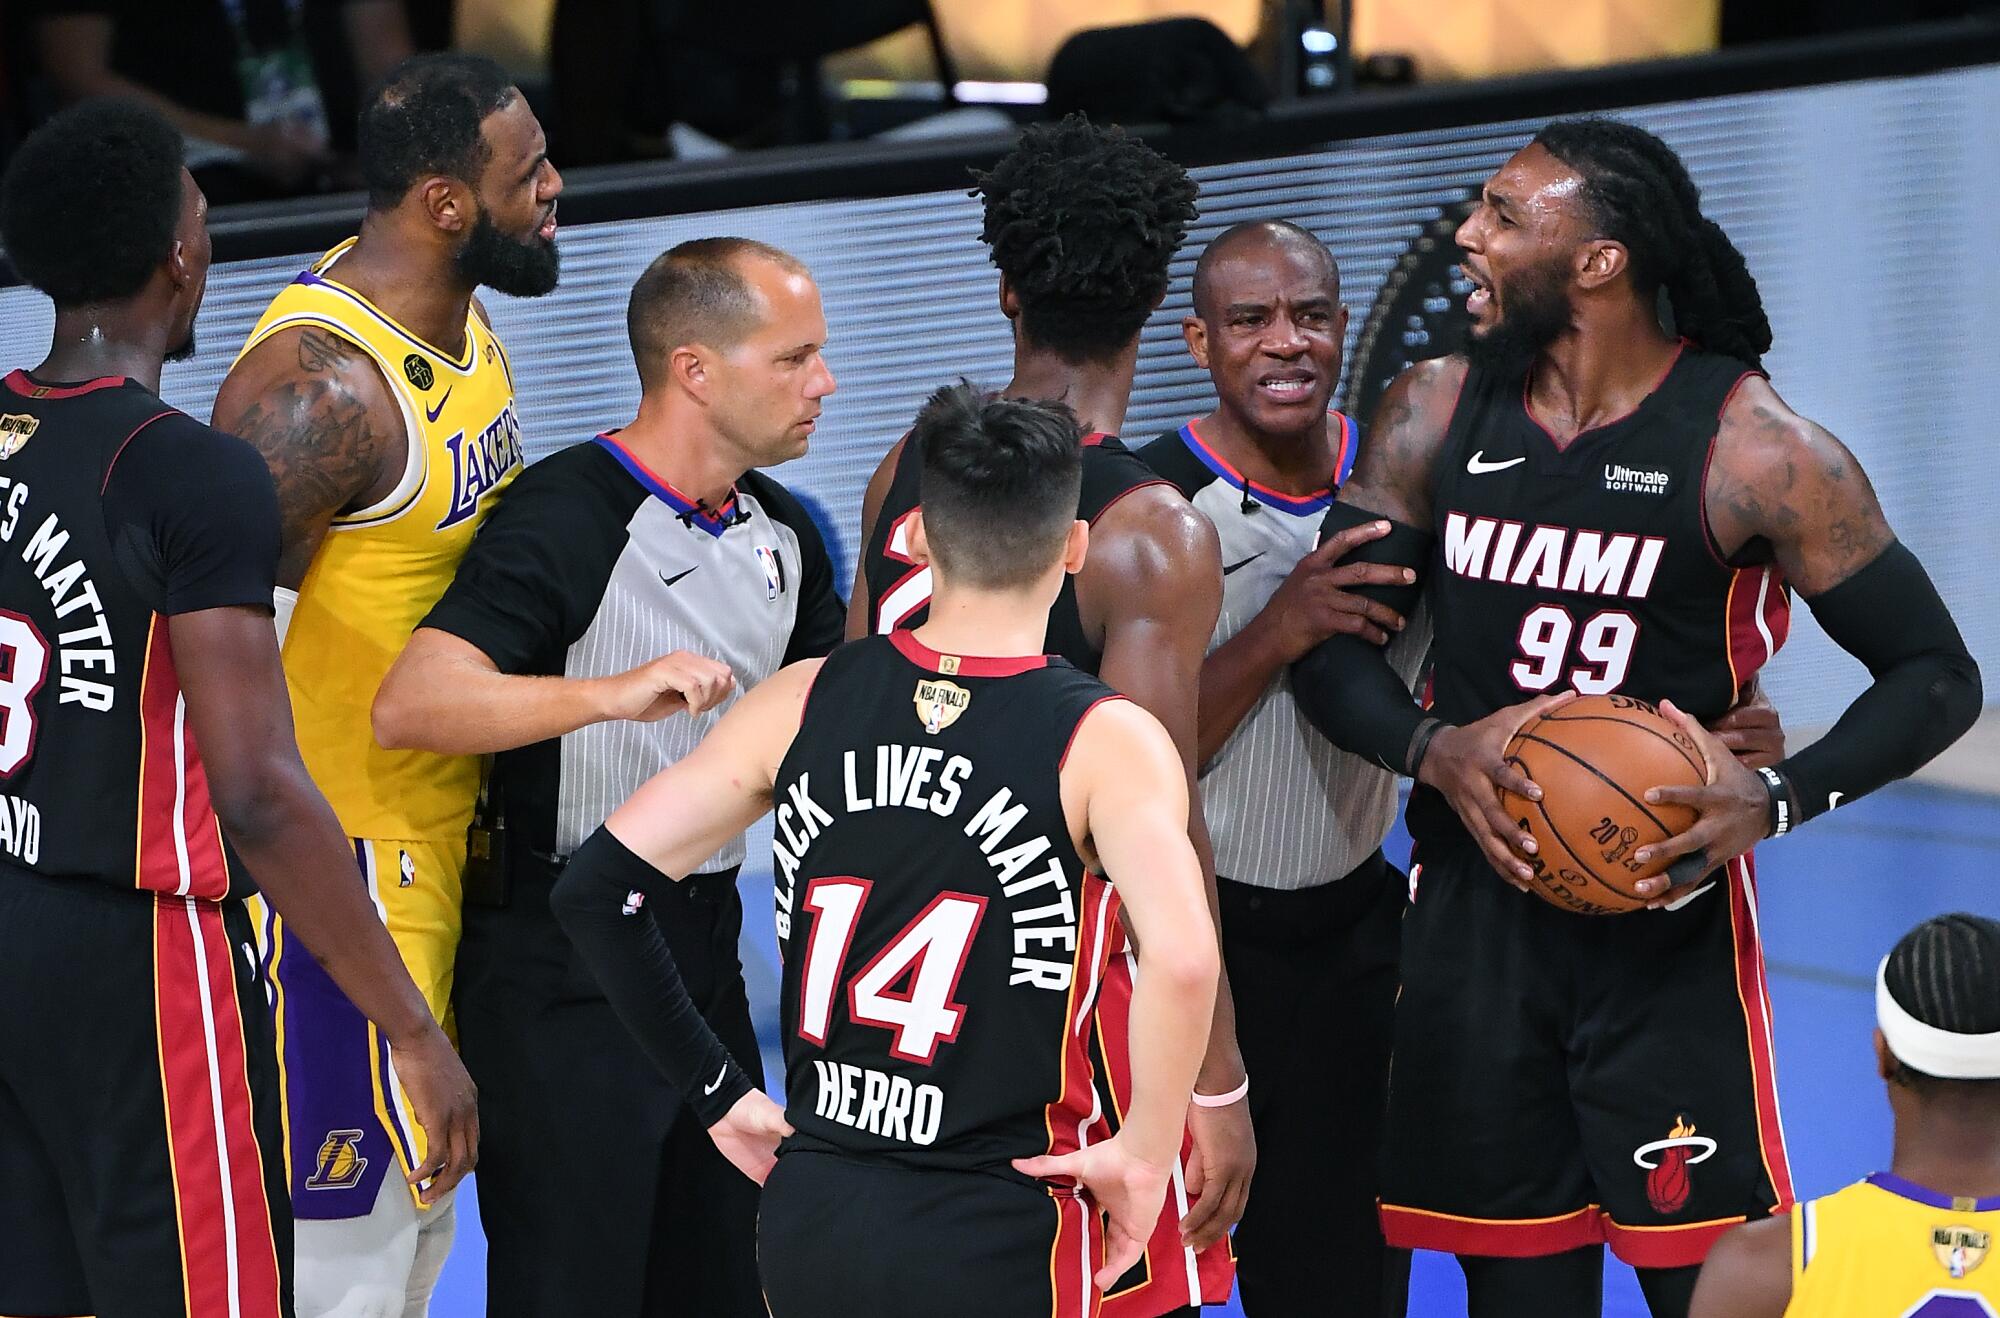 Referees try to separate players after Lakers forward LeBron James was fouled by Heat forward Jae Crowder.